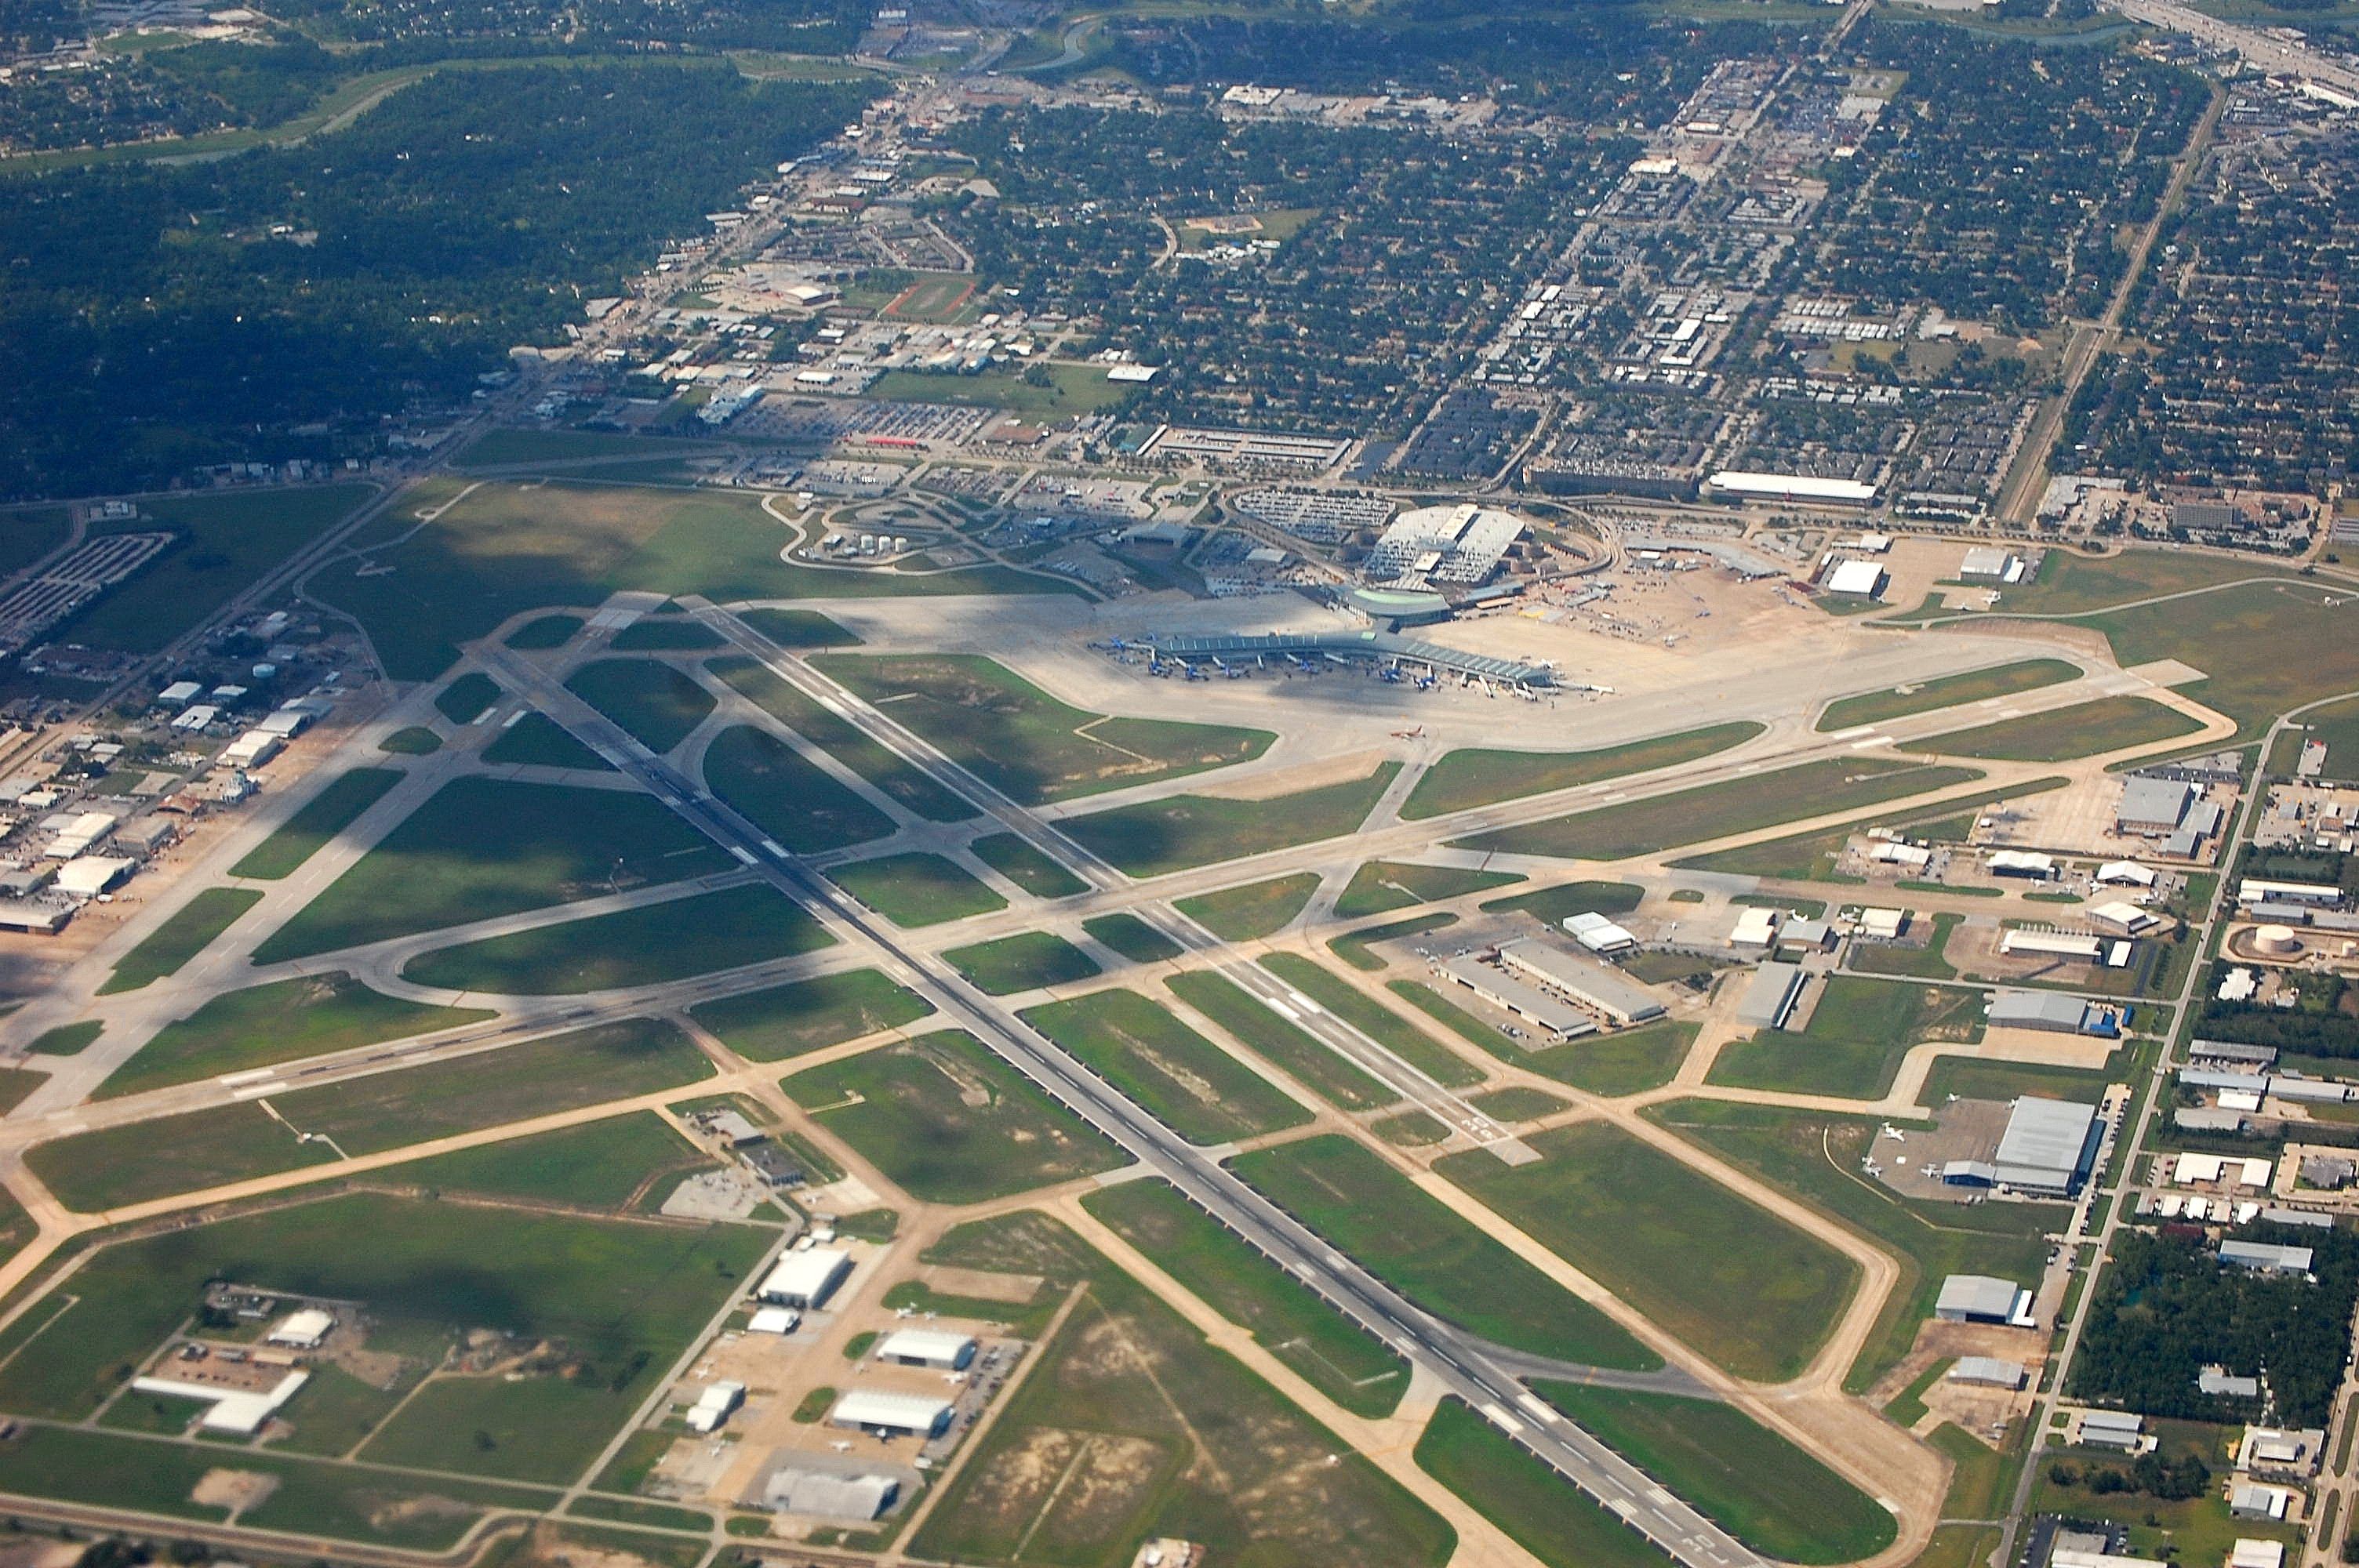 An aerial view of William P. Hobby Airport in Houston, Texas.